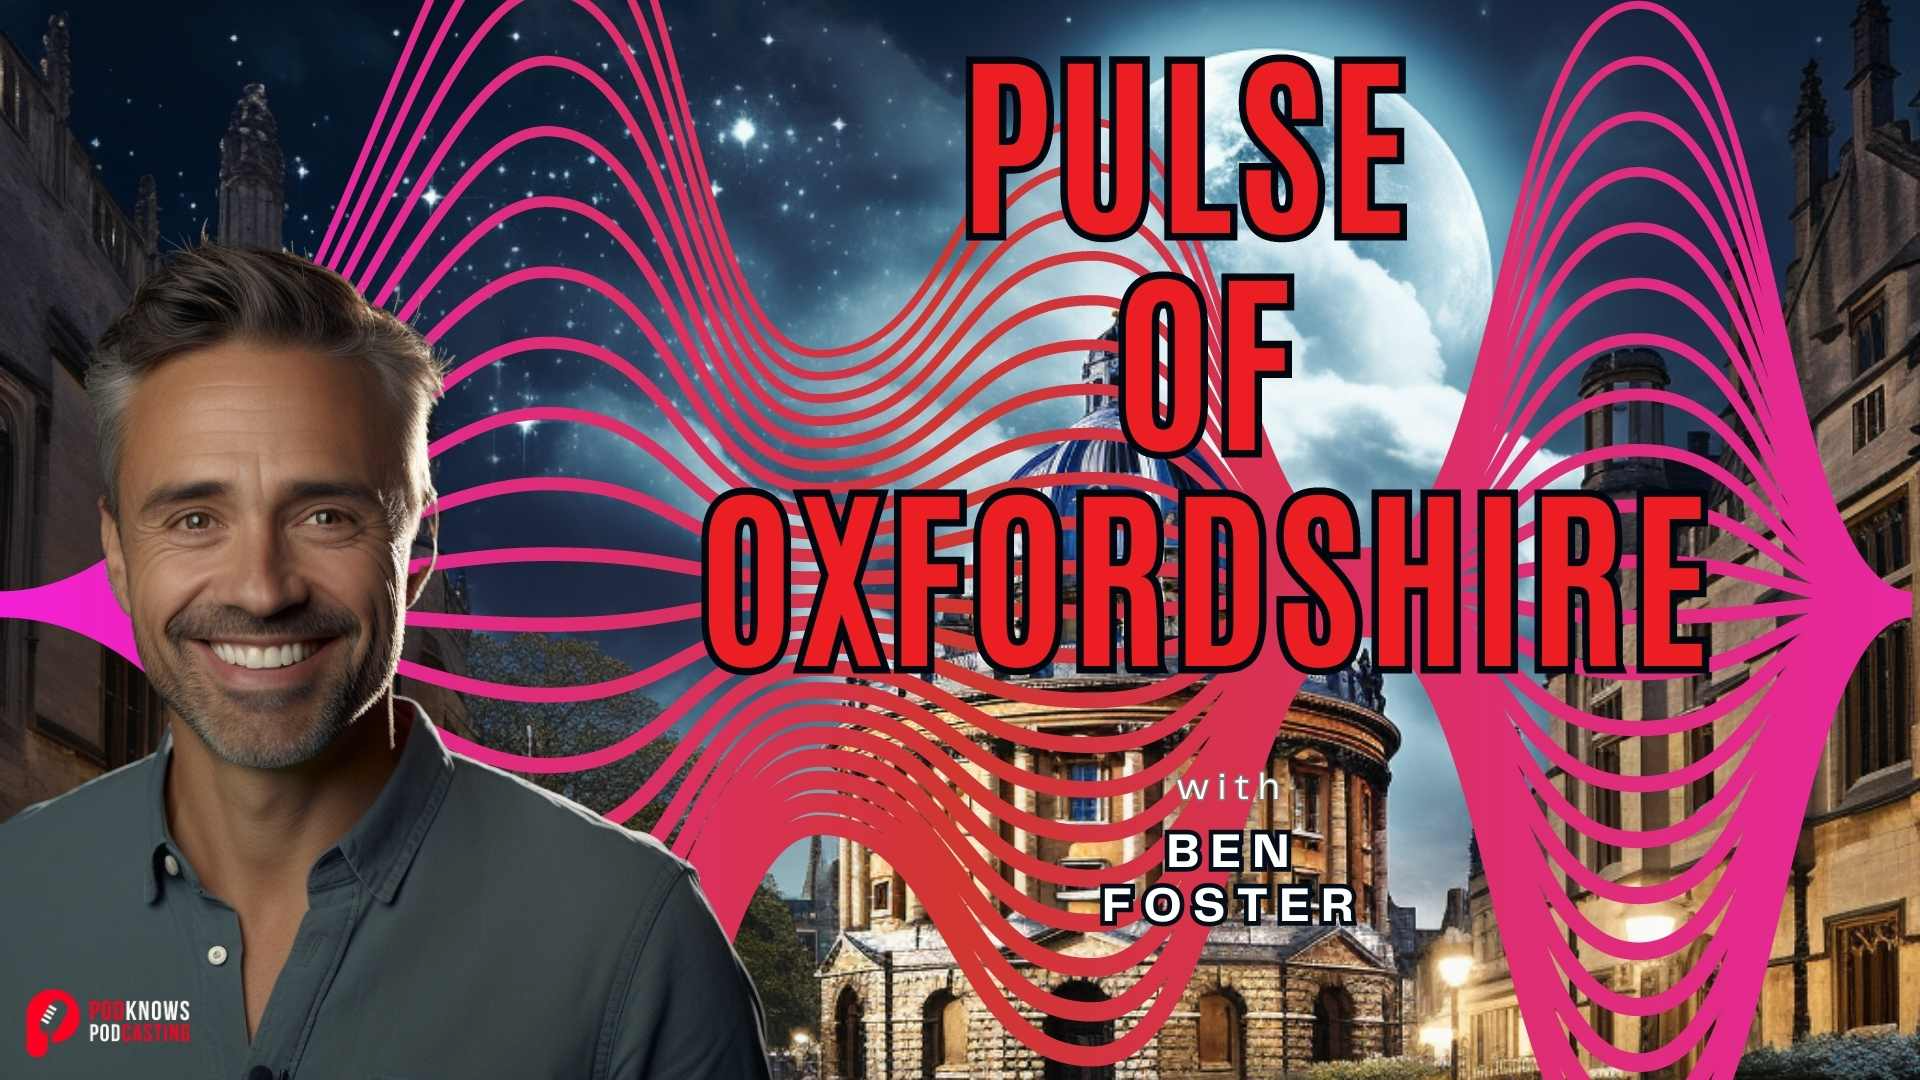 Pulse of Oxfordshire